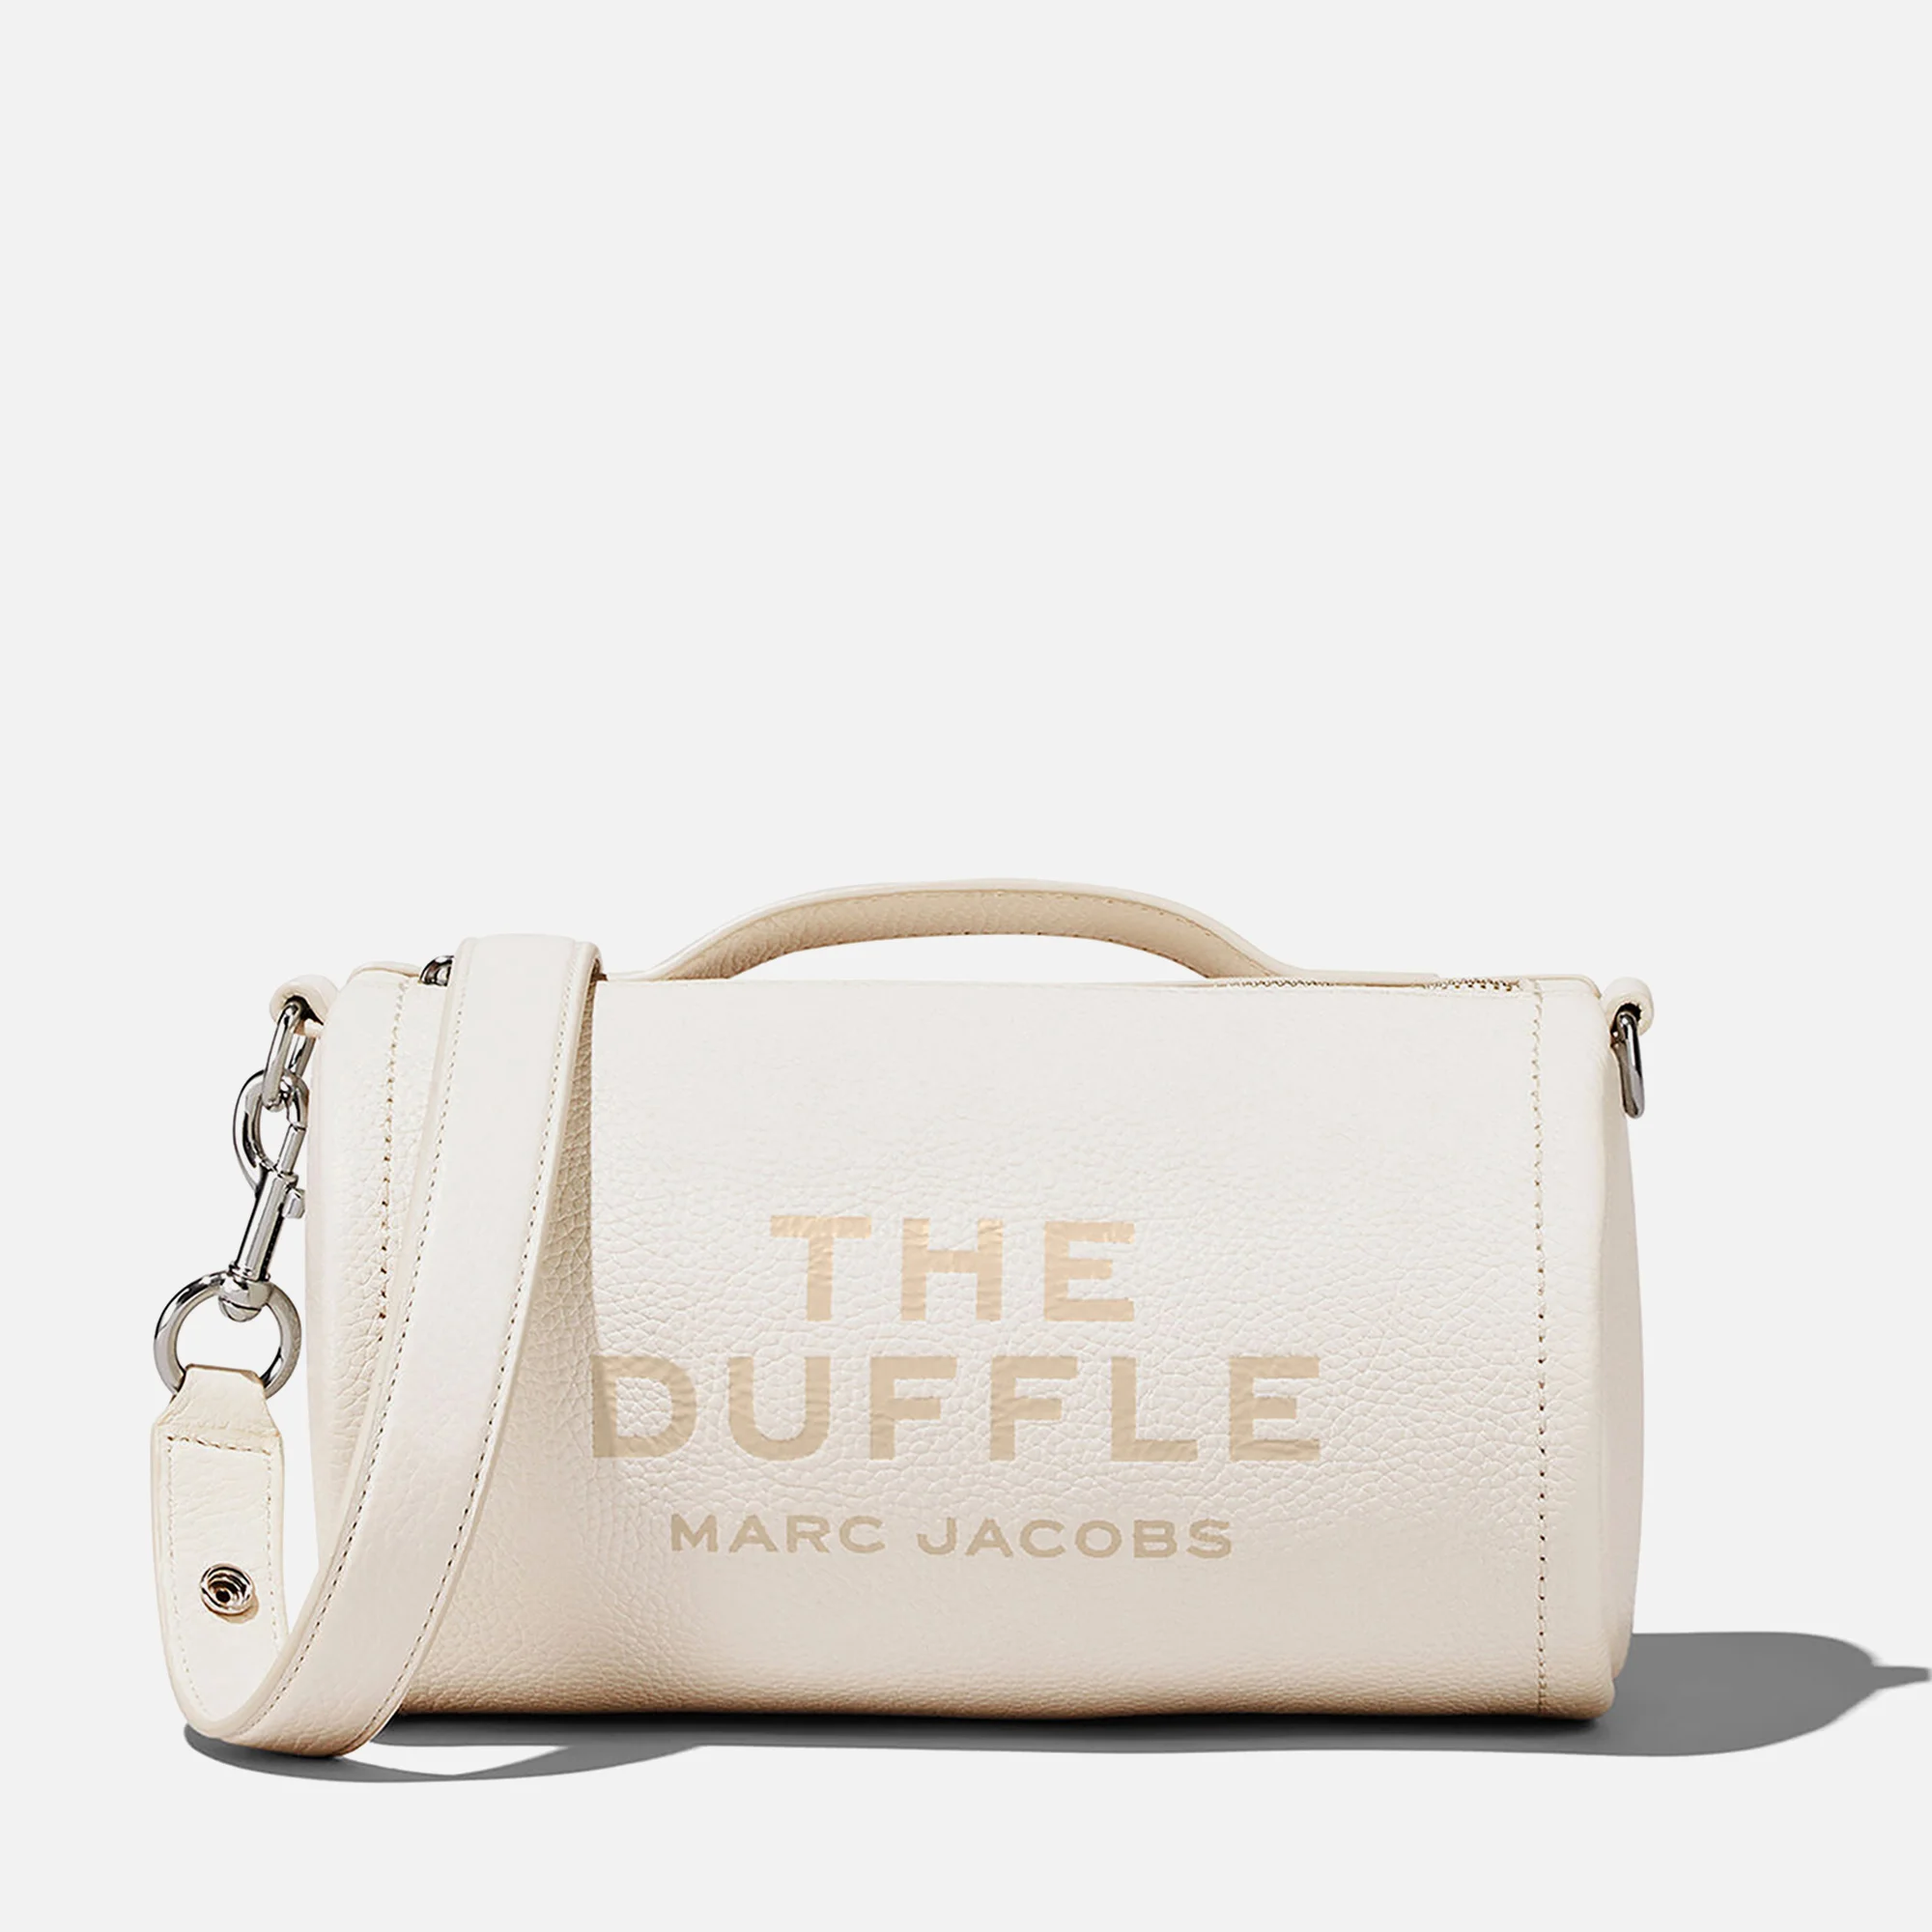 Marc Jacobs The Leather Duffle Bag Image 1